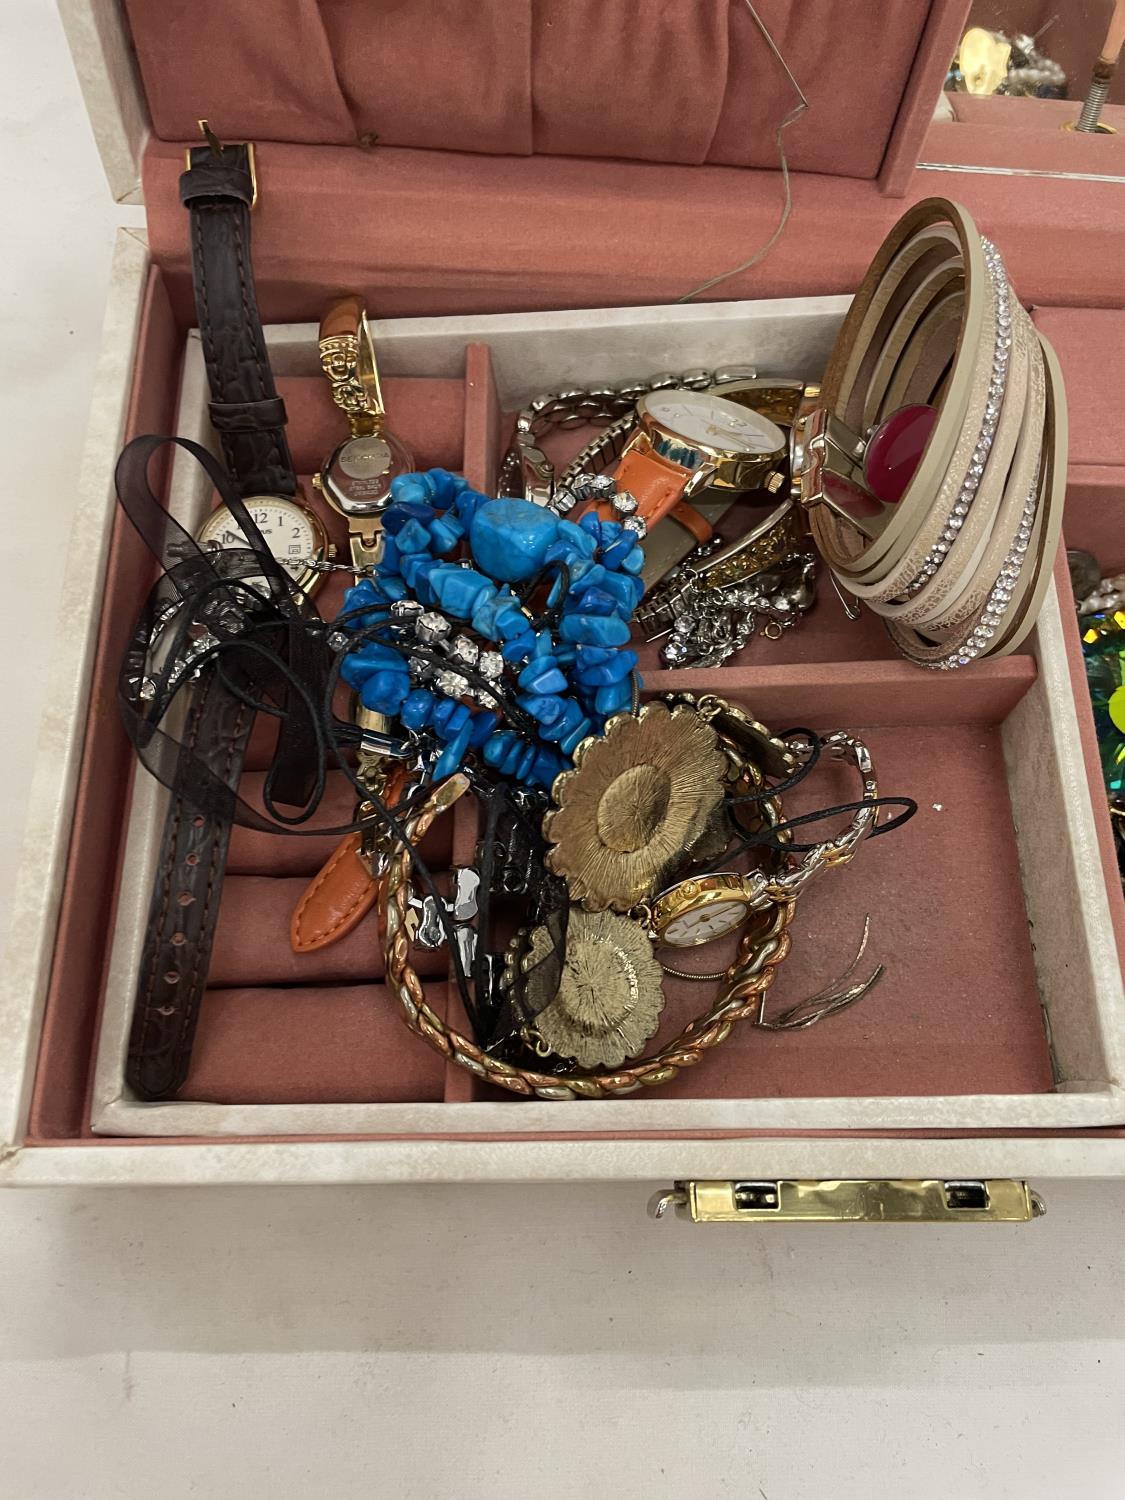 A JEWELLERY BOX CONTAINING WATCHES, BRACELETS, NECKLACES, EARRINGS, ETC - Image 4 of 8